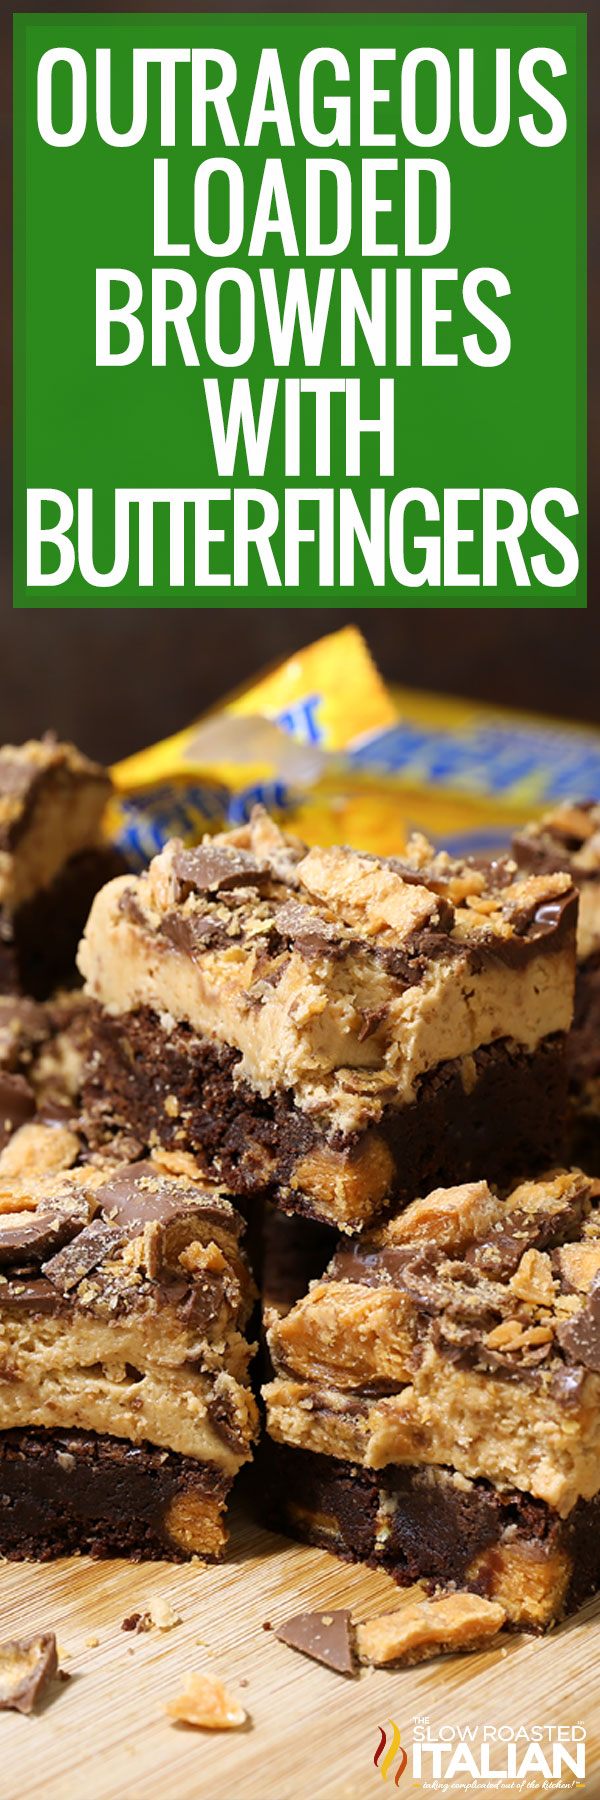 Outrageous Loaded Brownies with Butterfingers - PIN